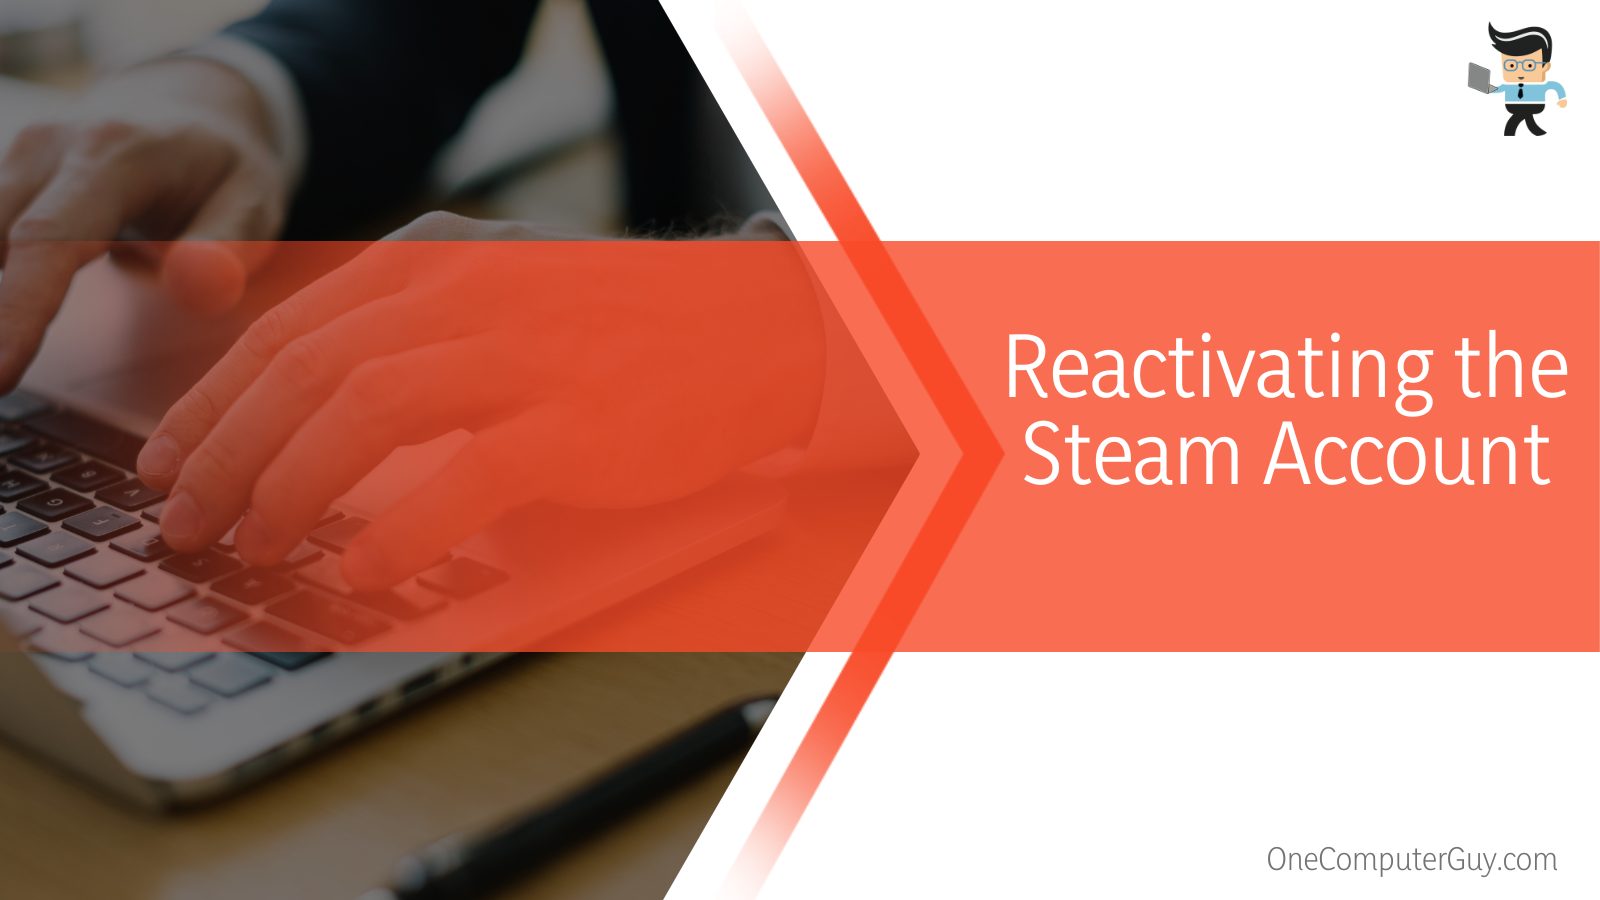 Confirming and Reactivating the Steam Account